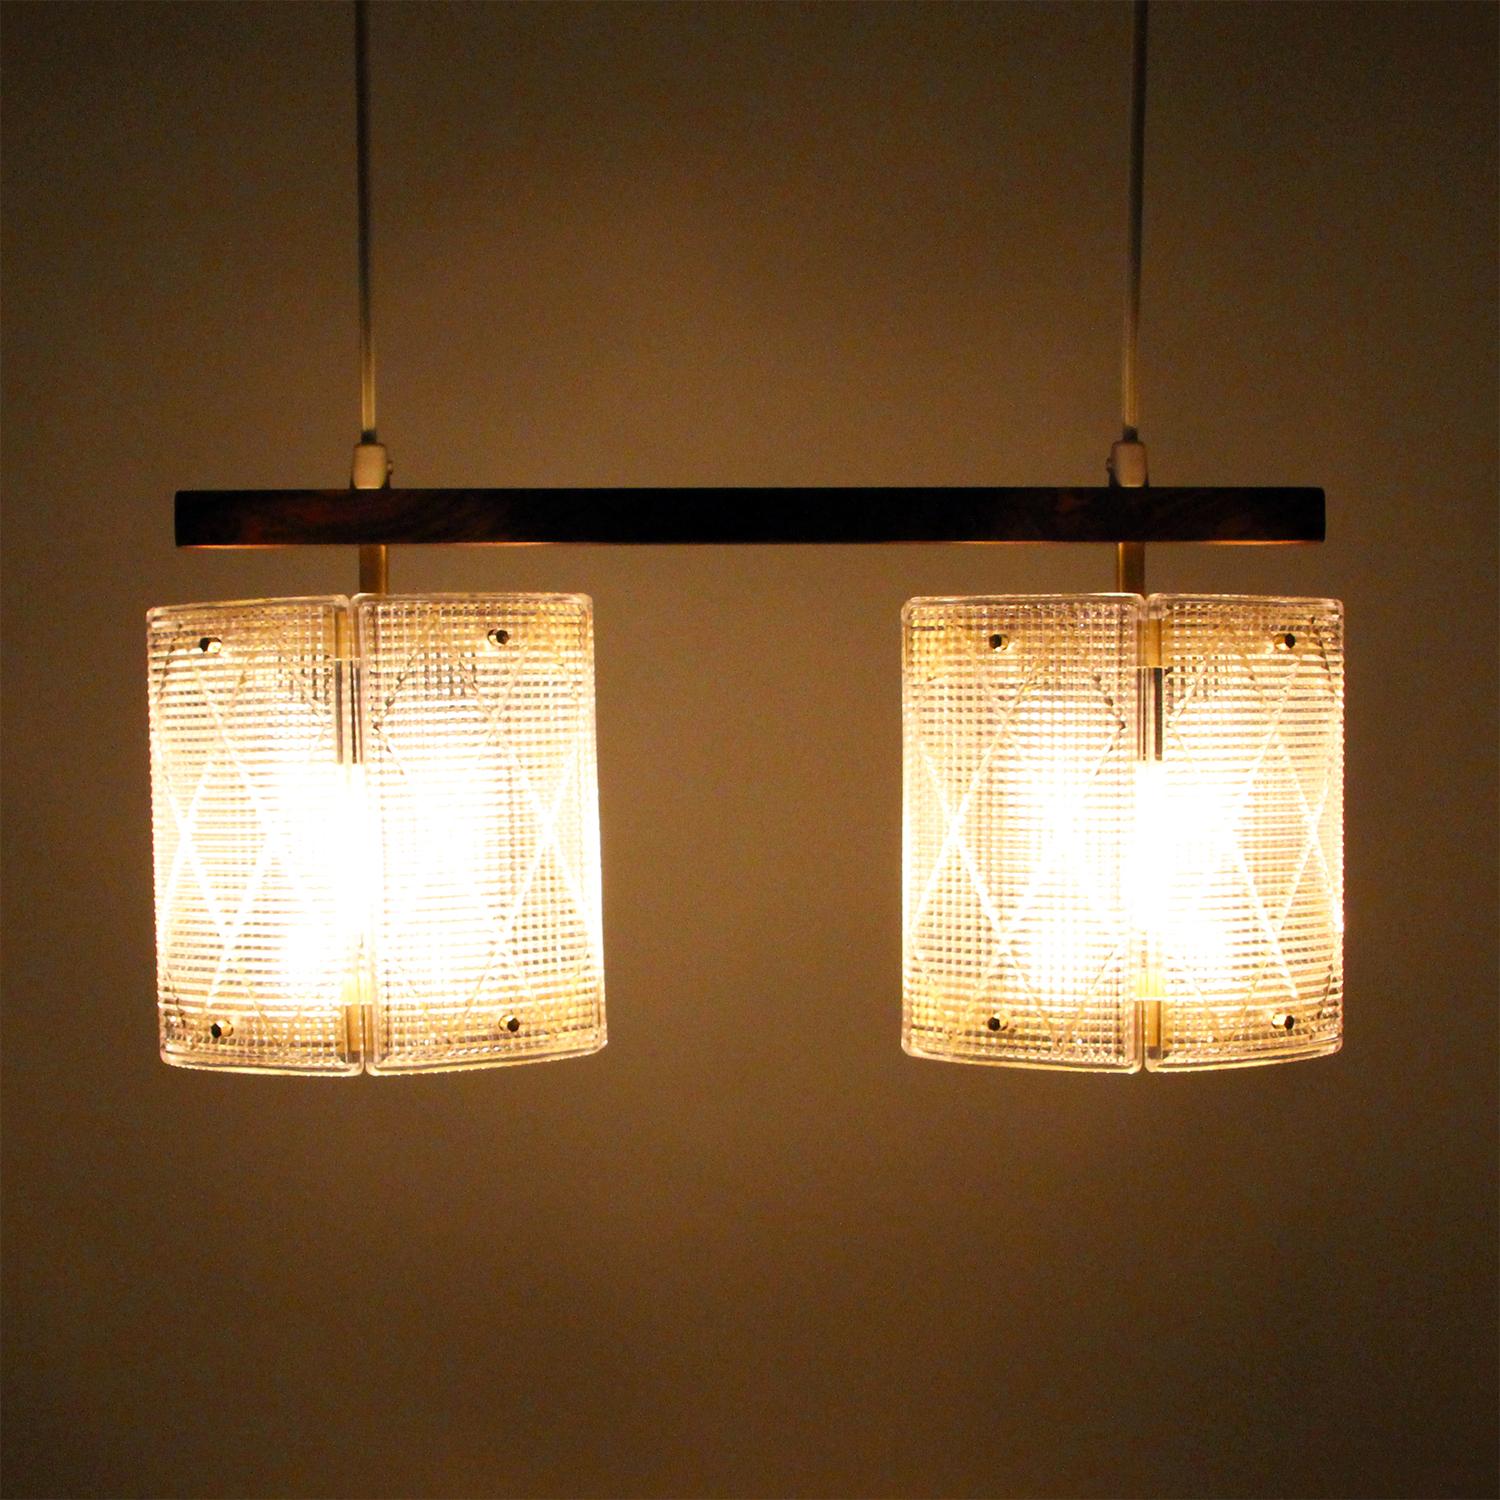 Double crystal light fixture by Swedish Eriksmålaglas (presumed) in the 1950s, super attractive Scandinavian Modern crystal glass with dark wood hanging light in excellent vintage condition.

Gorgeous light fixture, comprised of two crystal glass